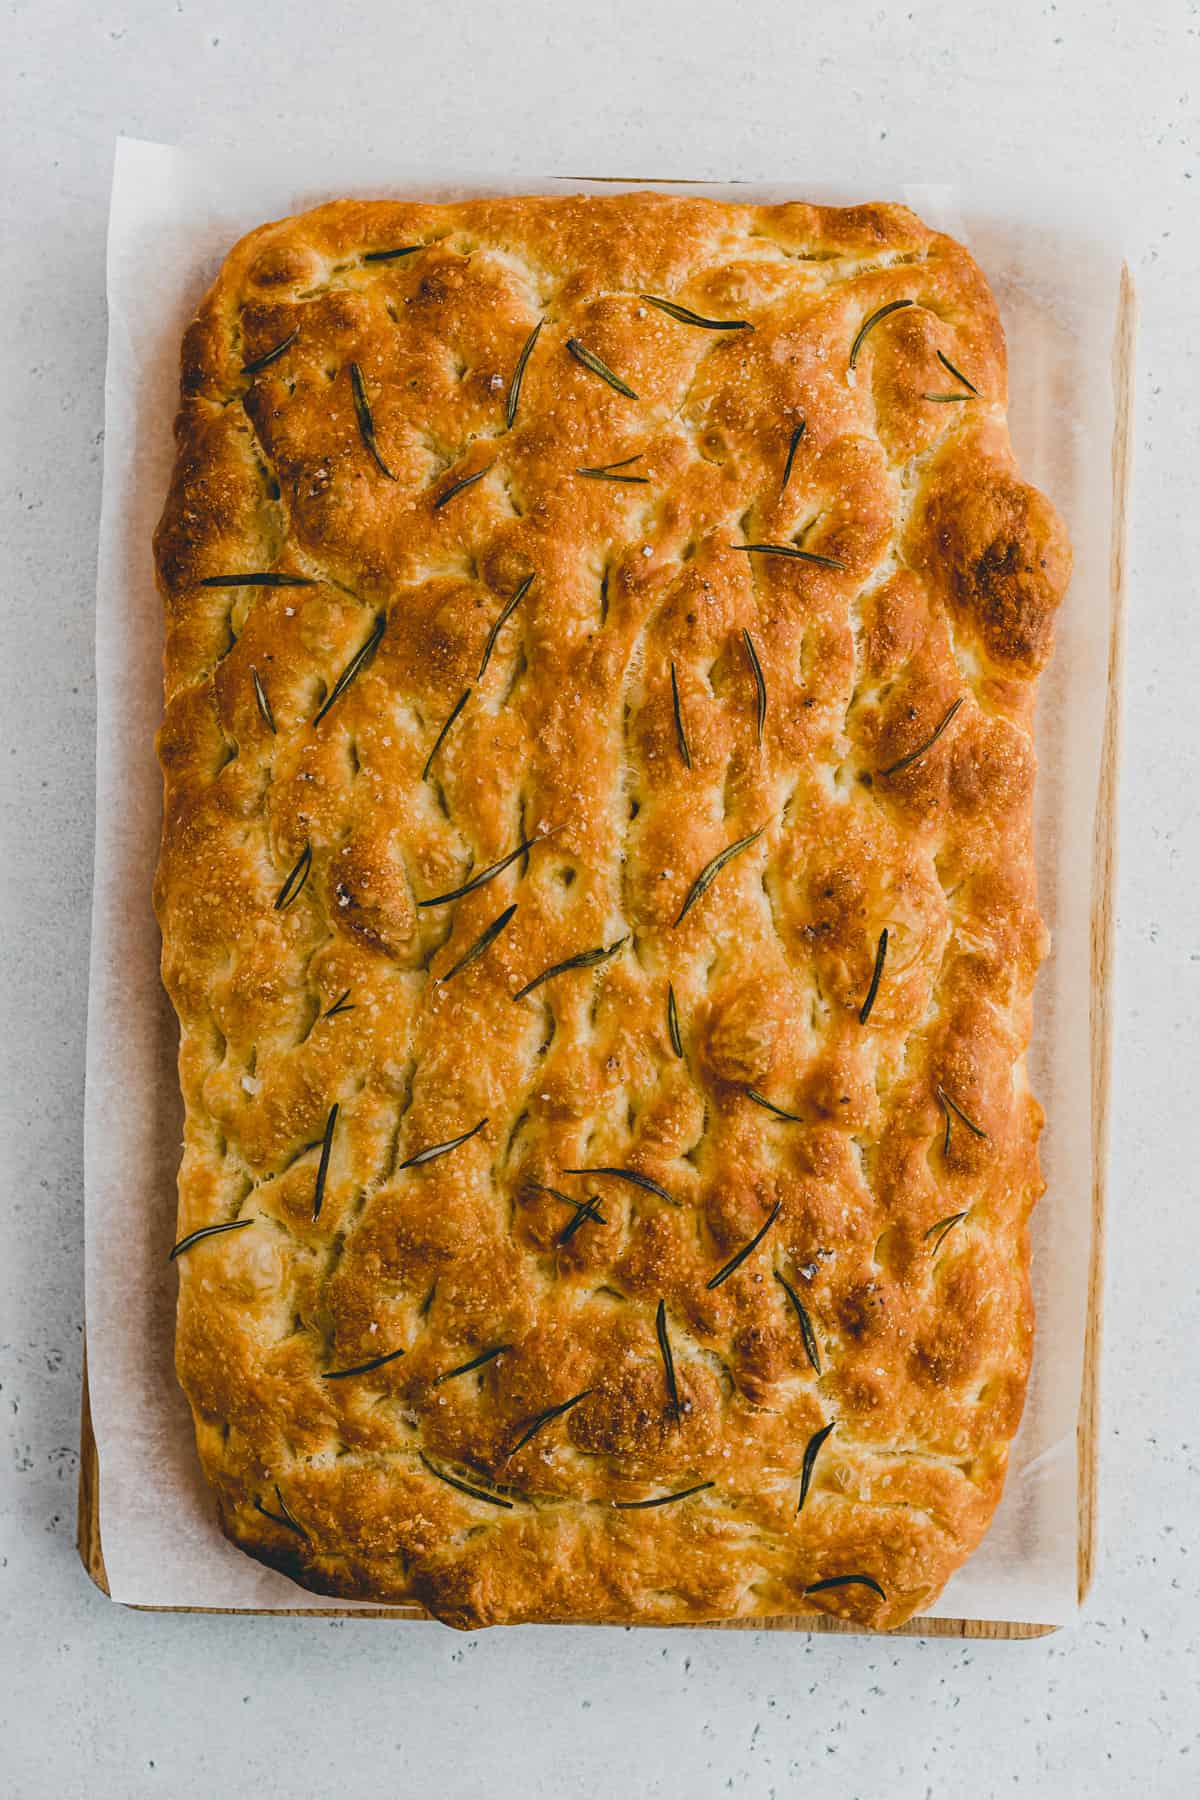 Top view of baked rosemary no knead focaccia bread.